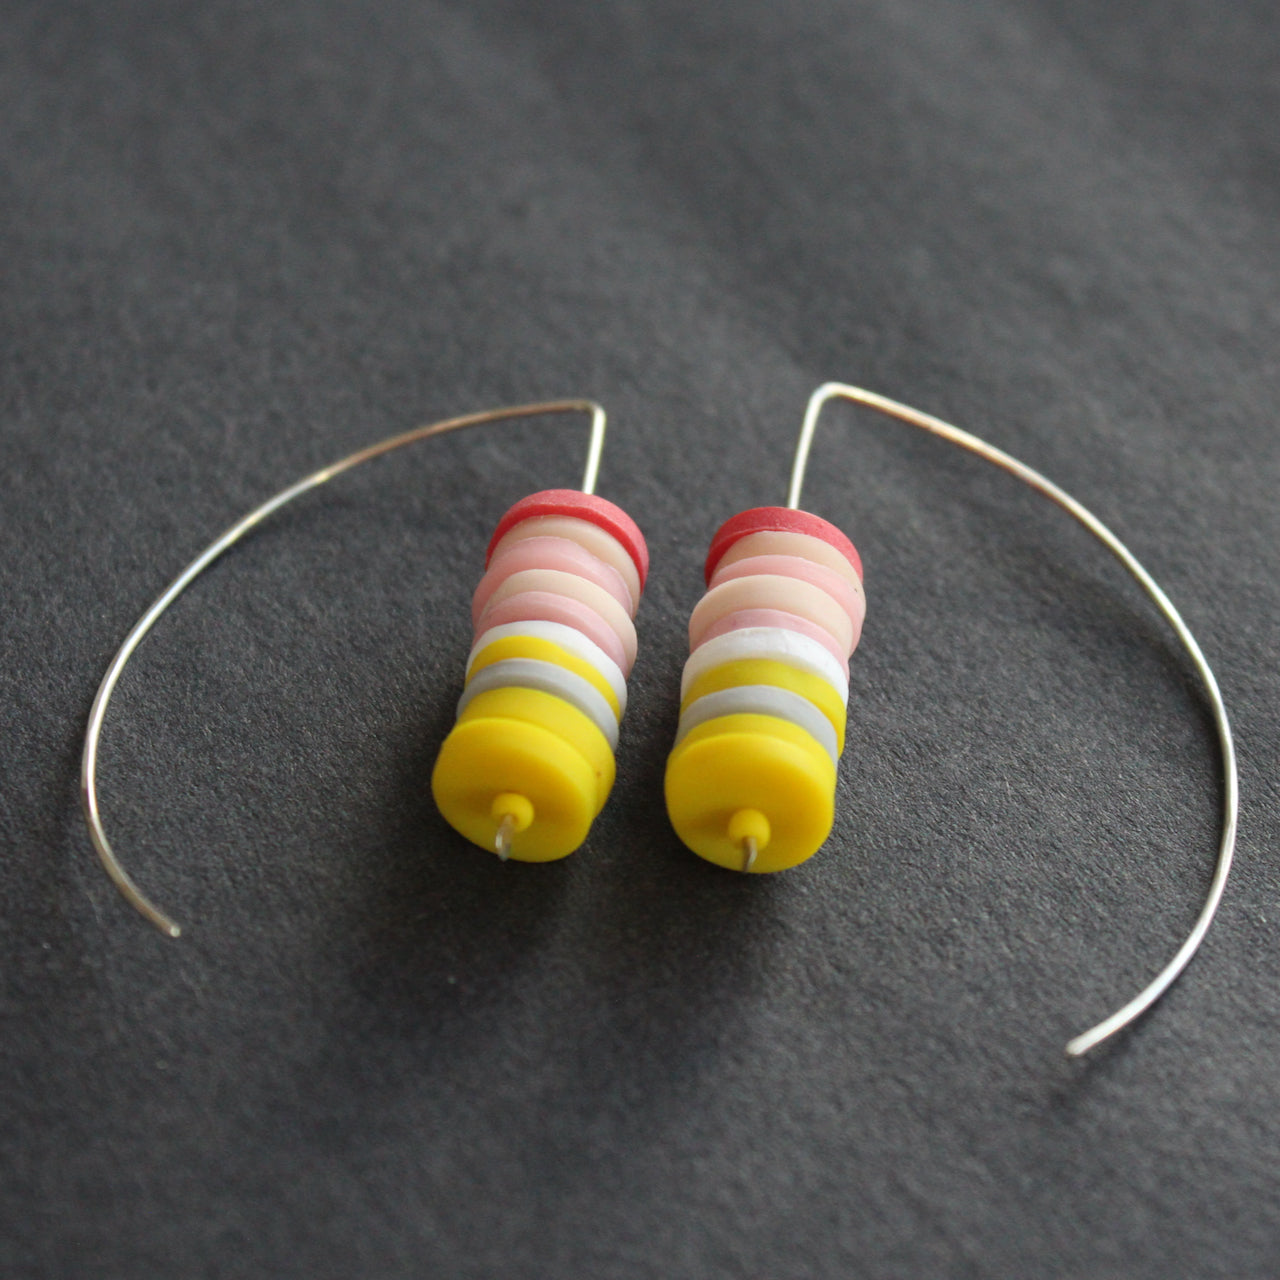 earrings made of small discs on top of each other in yellow and shades of pink by jewellery designer Clare Lloyd.